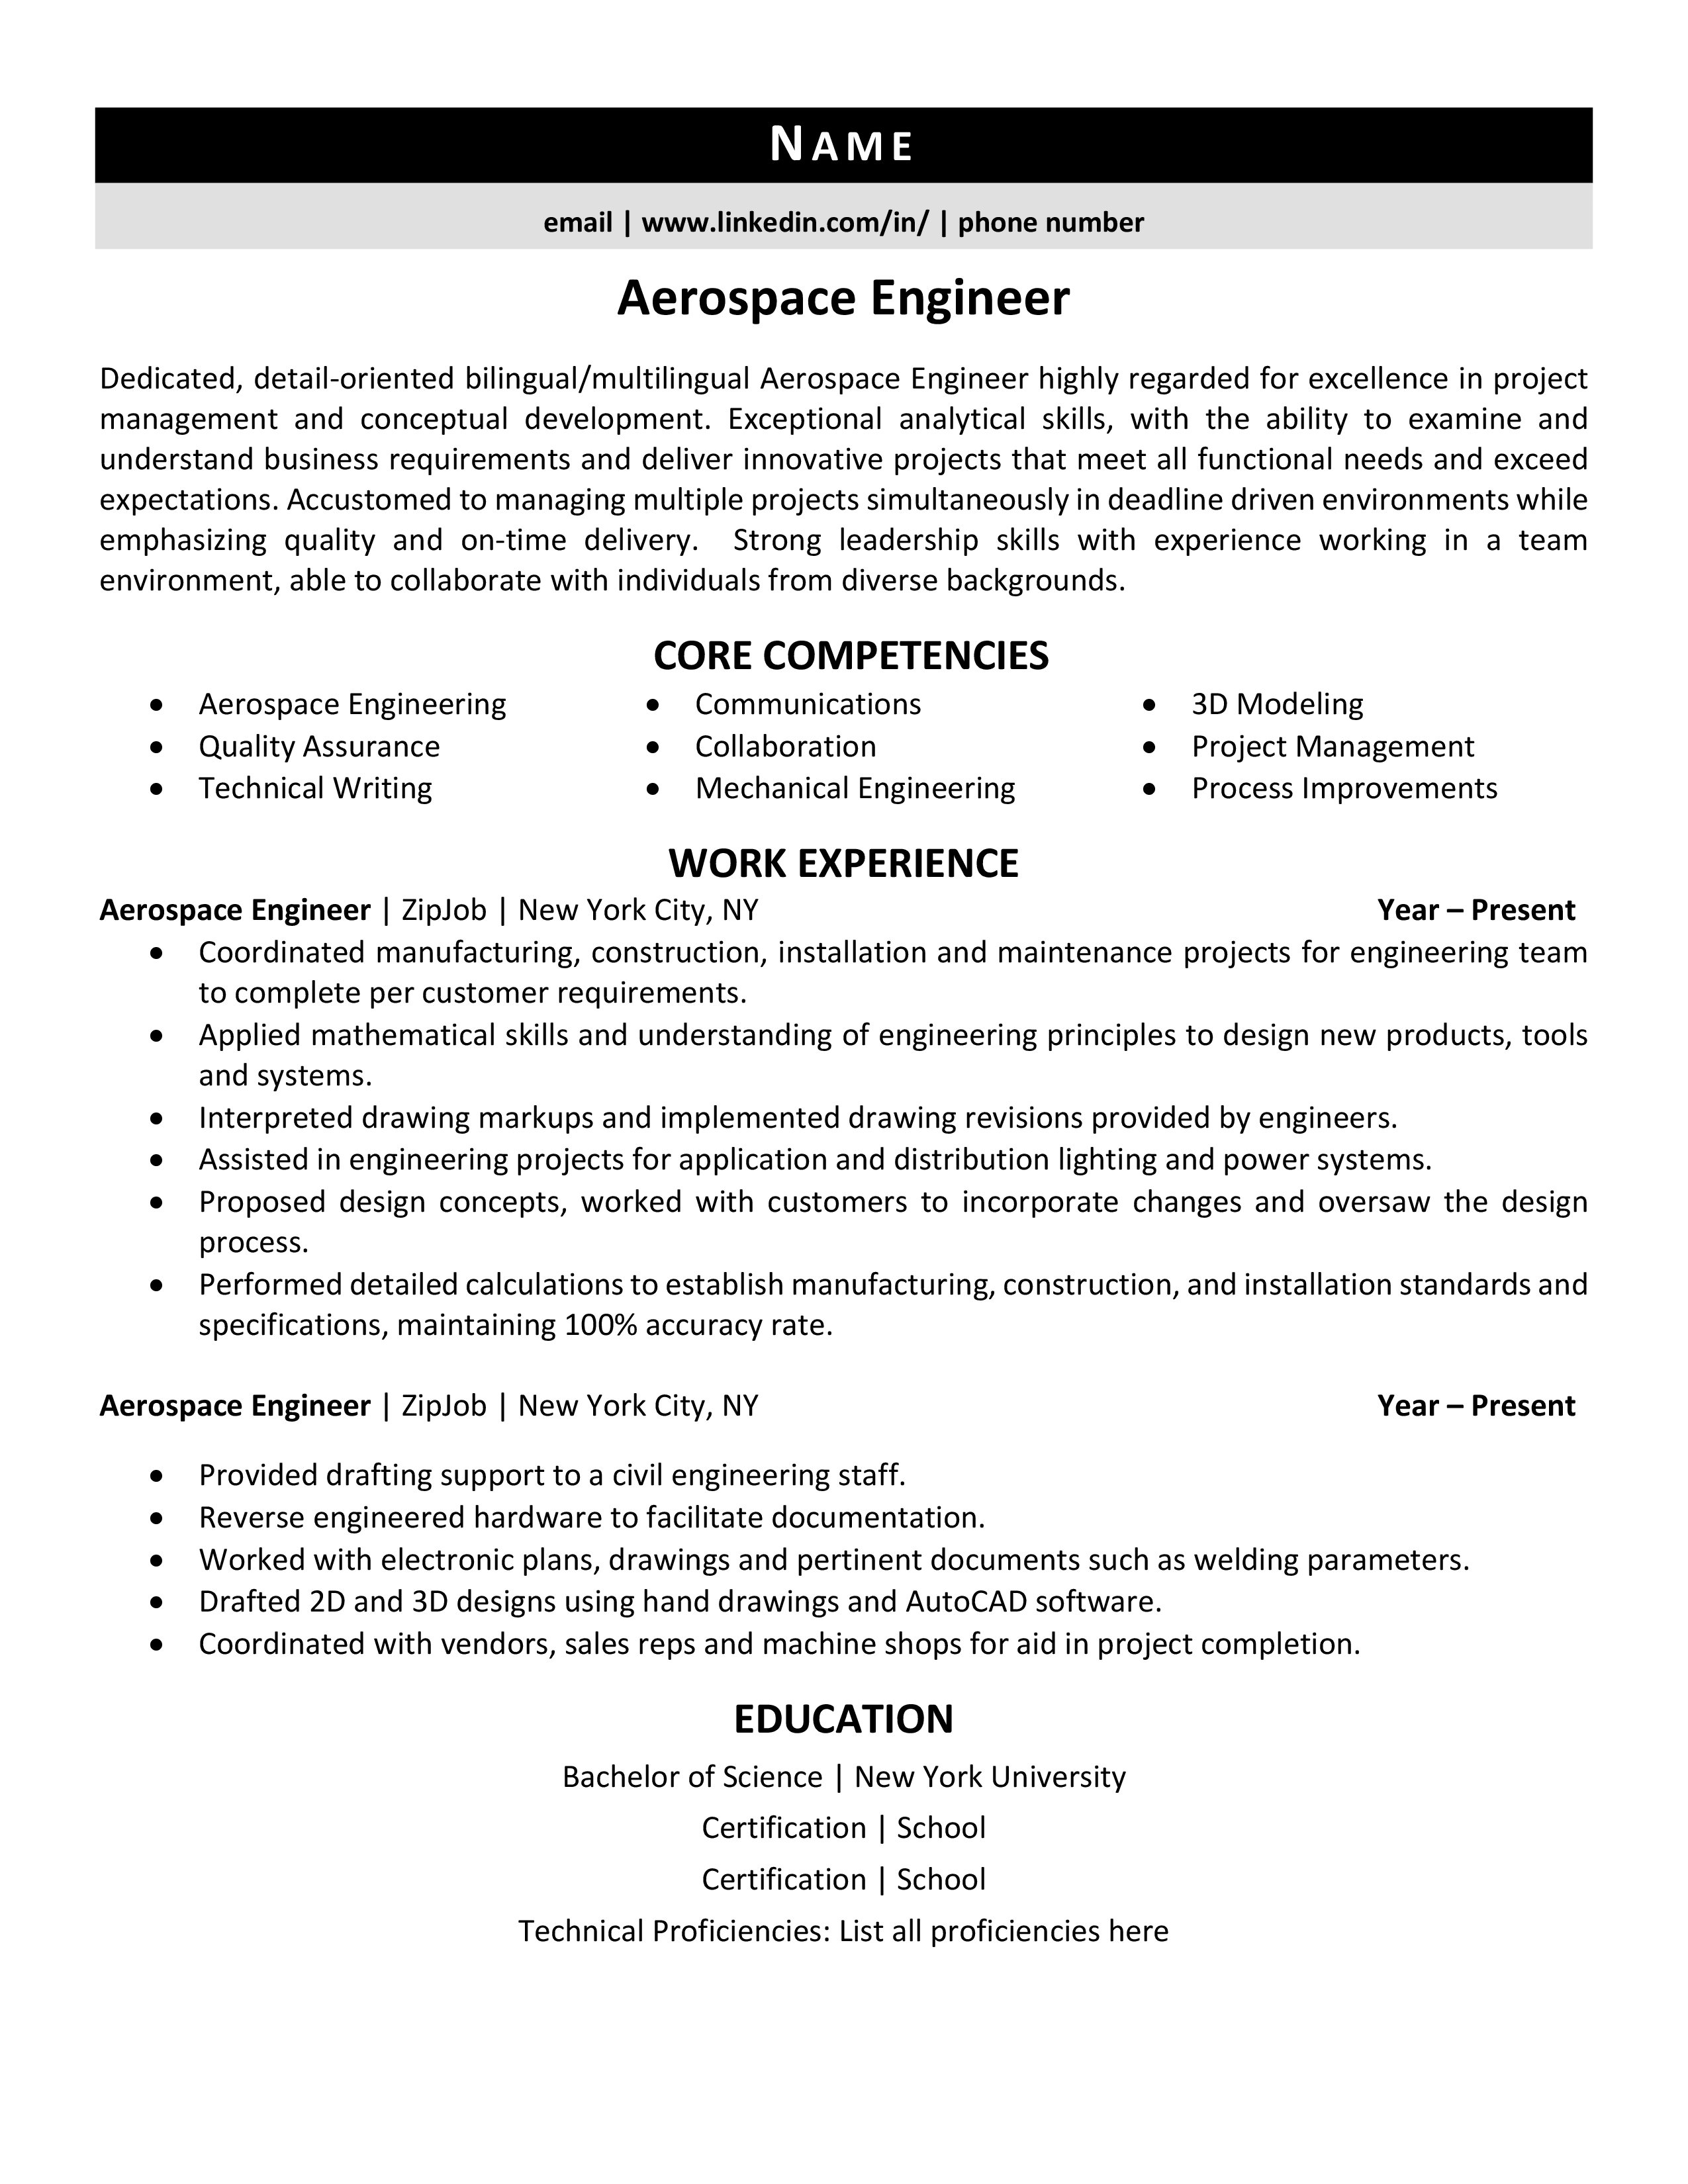 resume examples project manager aerospace